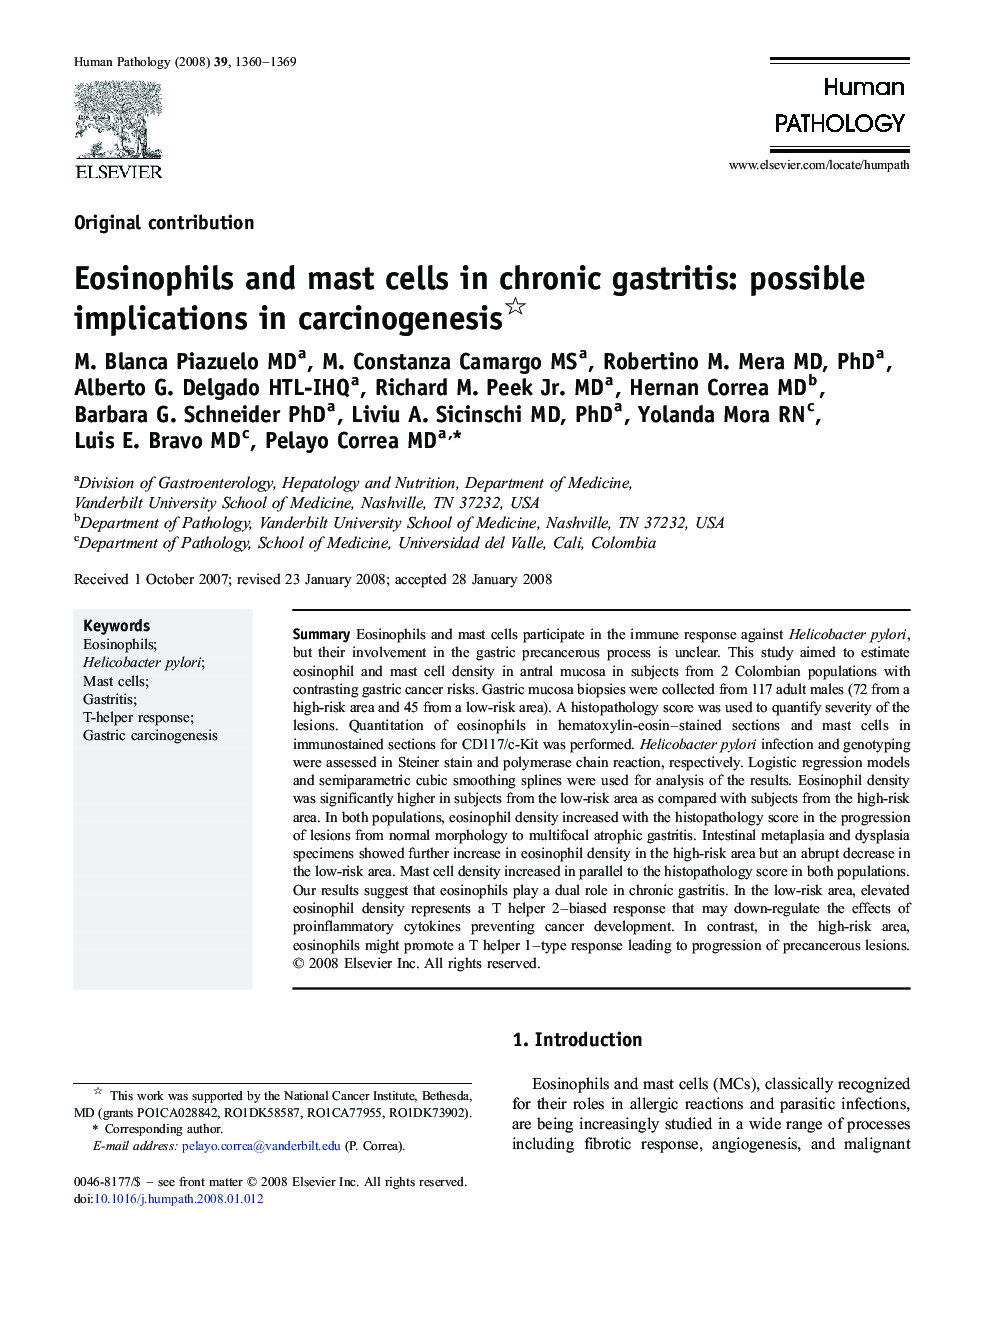 Eosinophils and mast cells in chronic gastritis: possible implications in carcinogenesis 